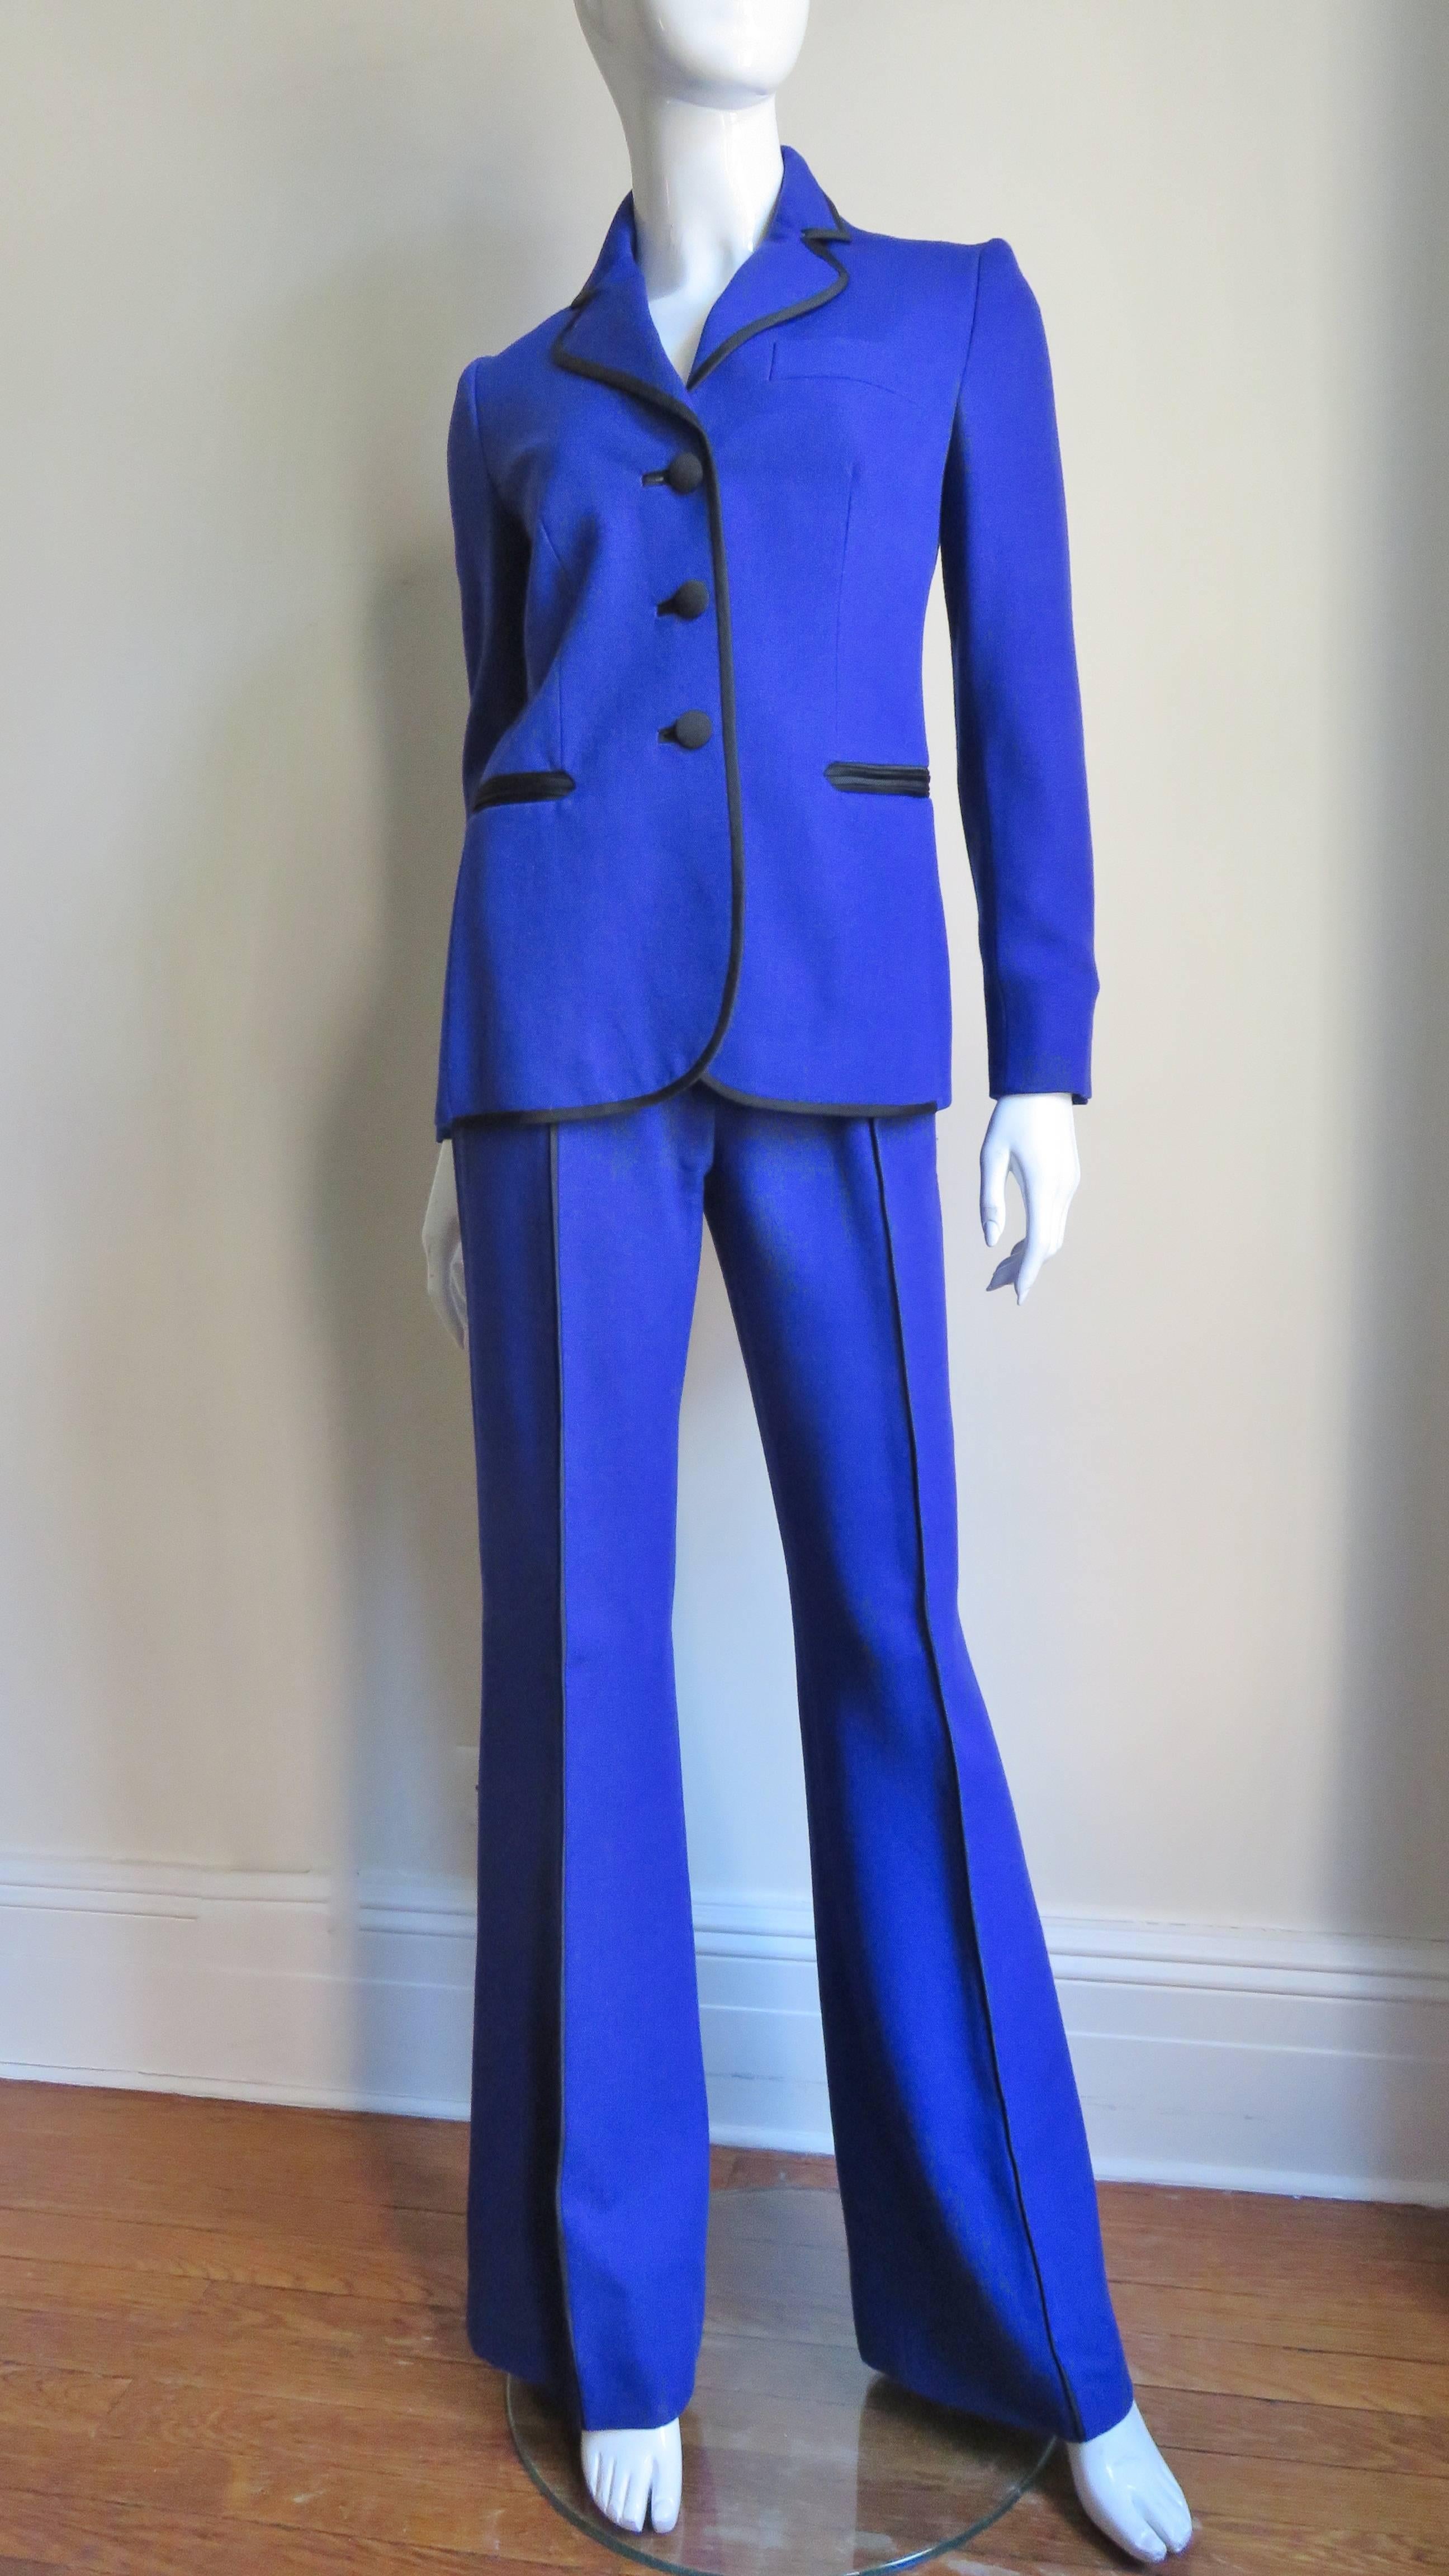 Women's Moschino Color Block Pantsuit with Applique Eyes Collar For Sale